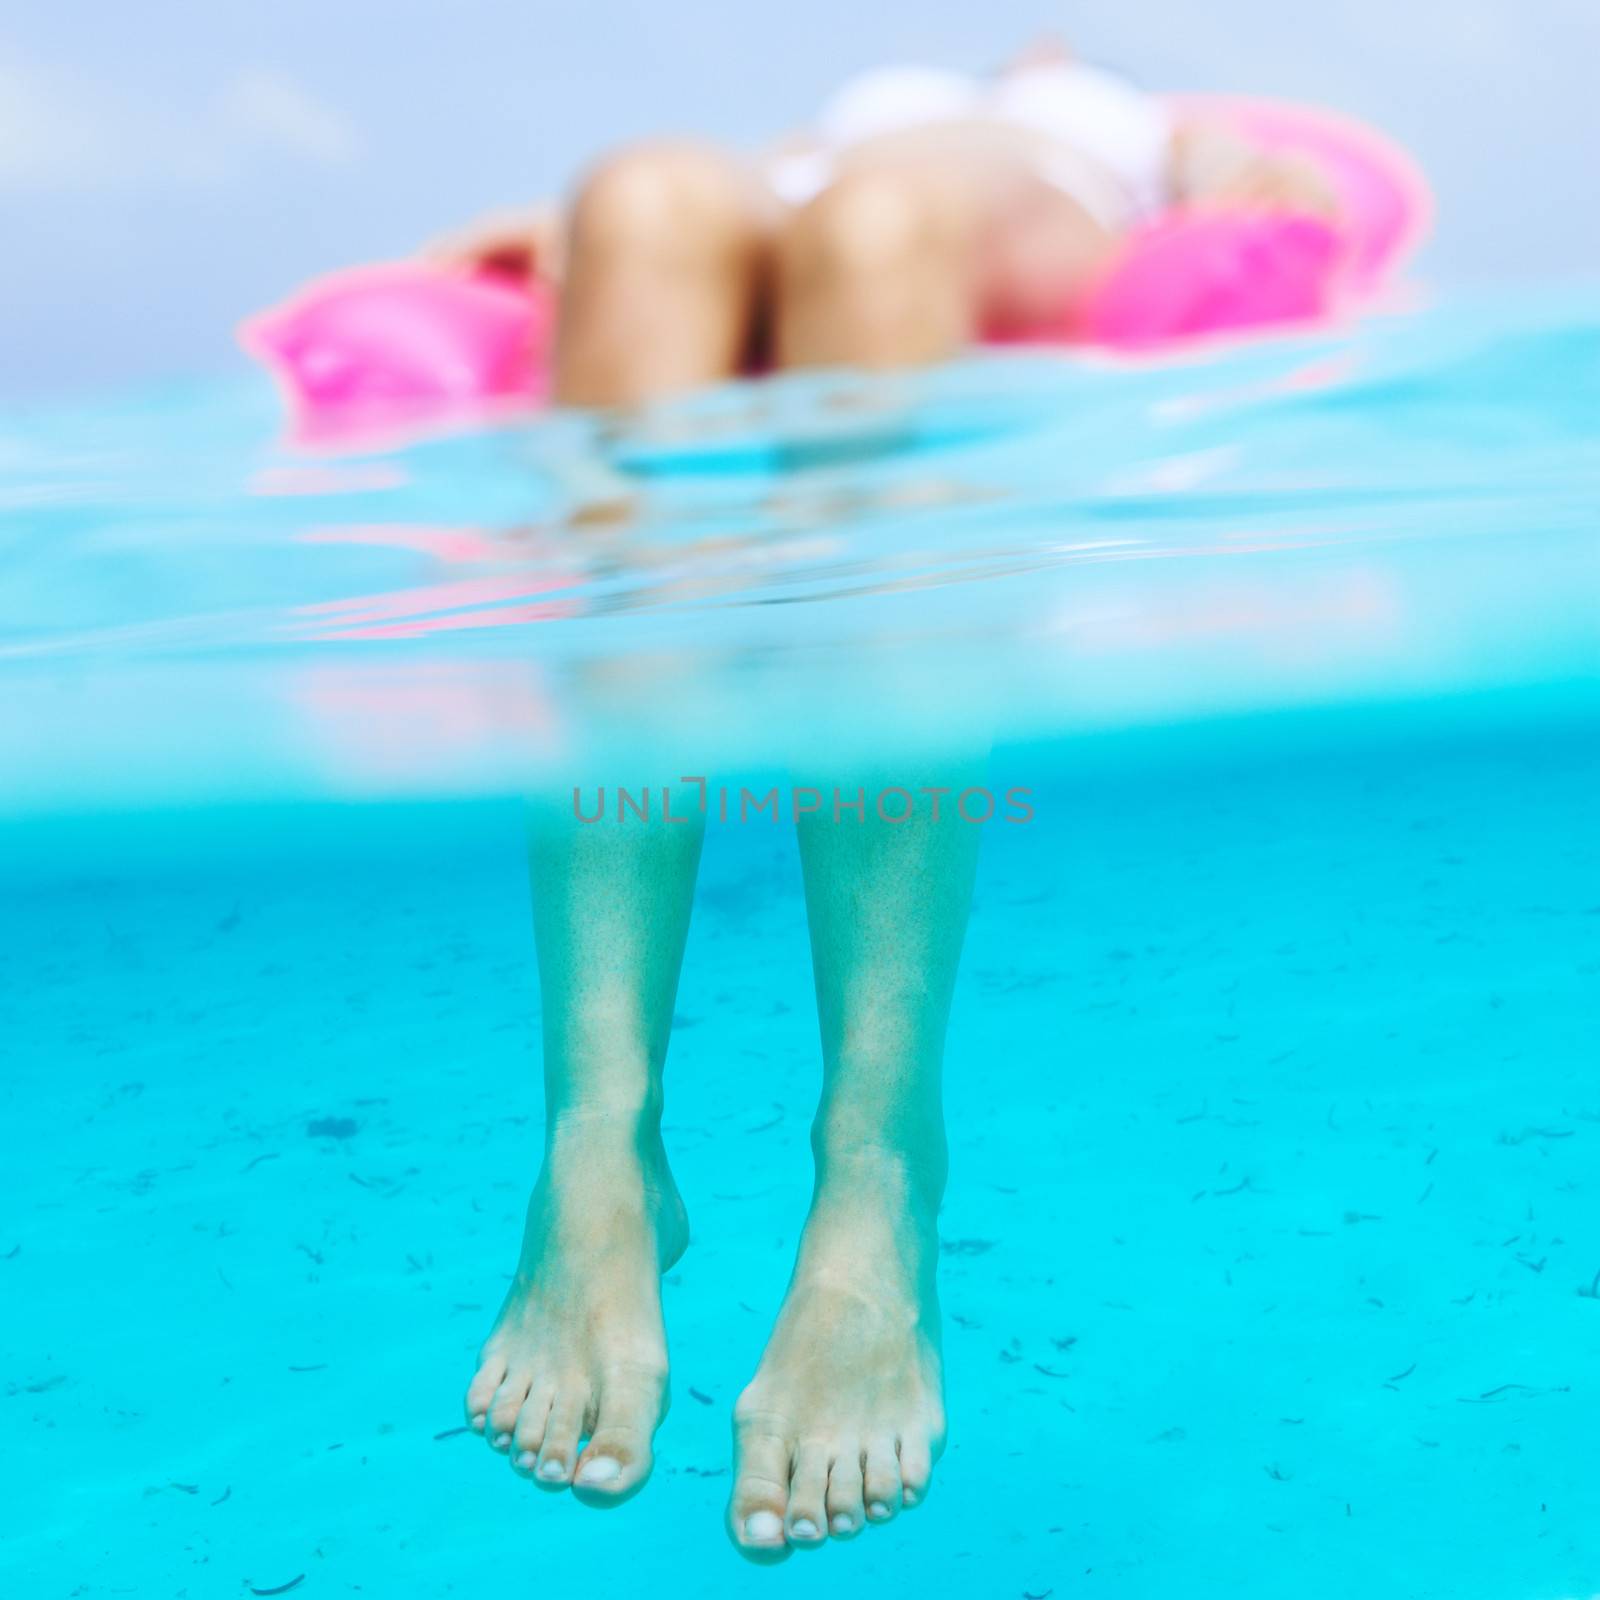 Woman relaxing on inflatable mattress, view from underwater by haveseen